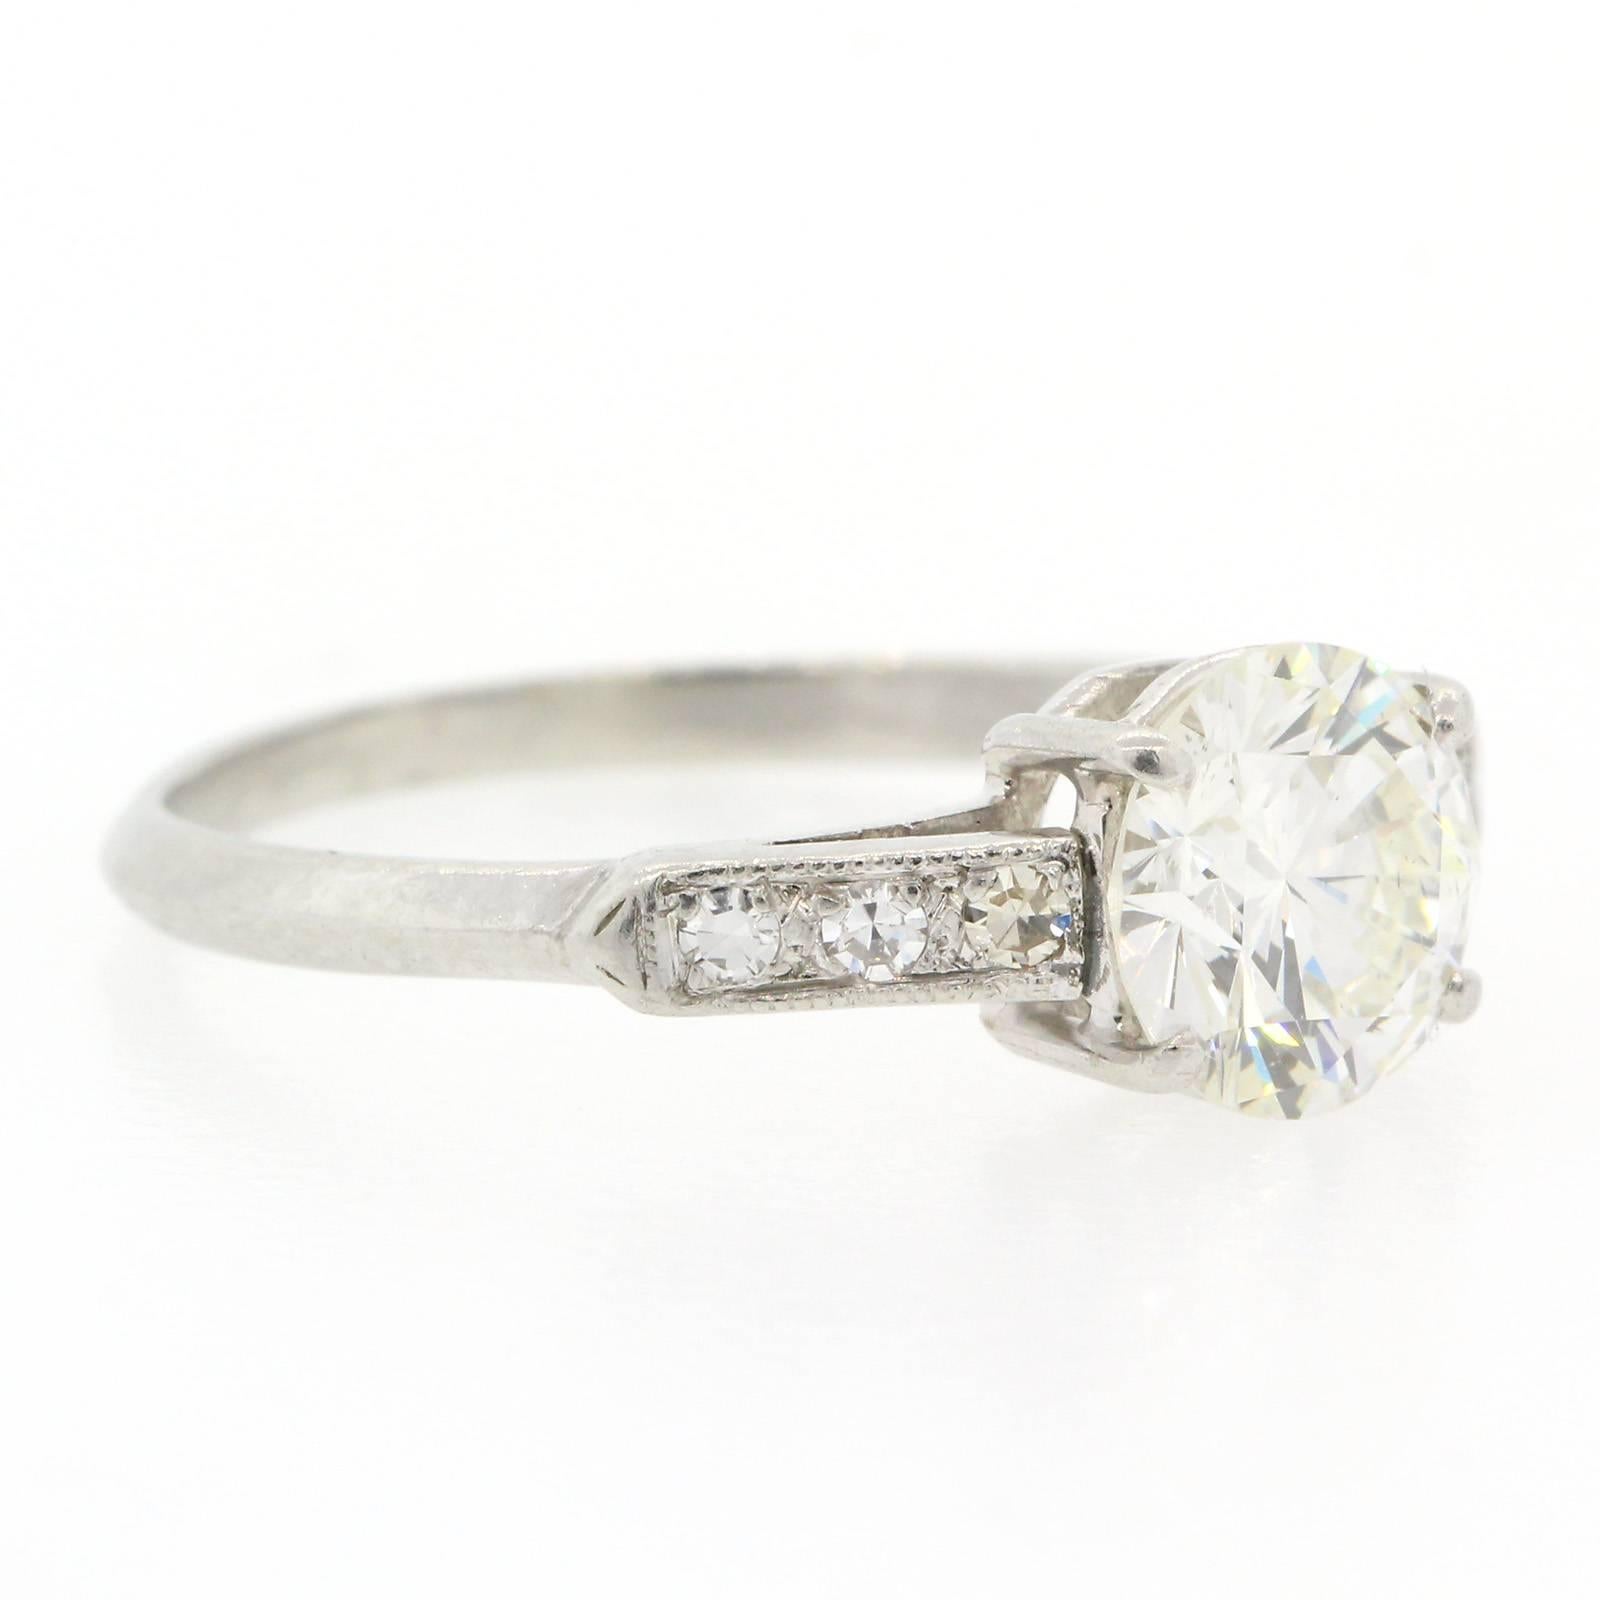 The Classic Engagement Ring!  A beautiful 1940s platinum ring featuring a 1.11 carats Round Brilliant Cut Diamond, certified I color - VS2 clarity and flanked by six old Single Cut Diamonds.  The setting is enhanced with time worn milgrain.  Just